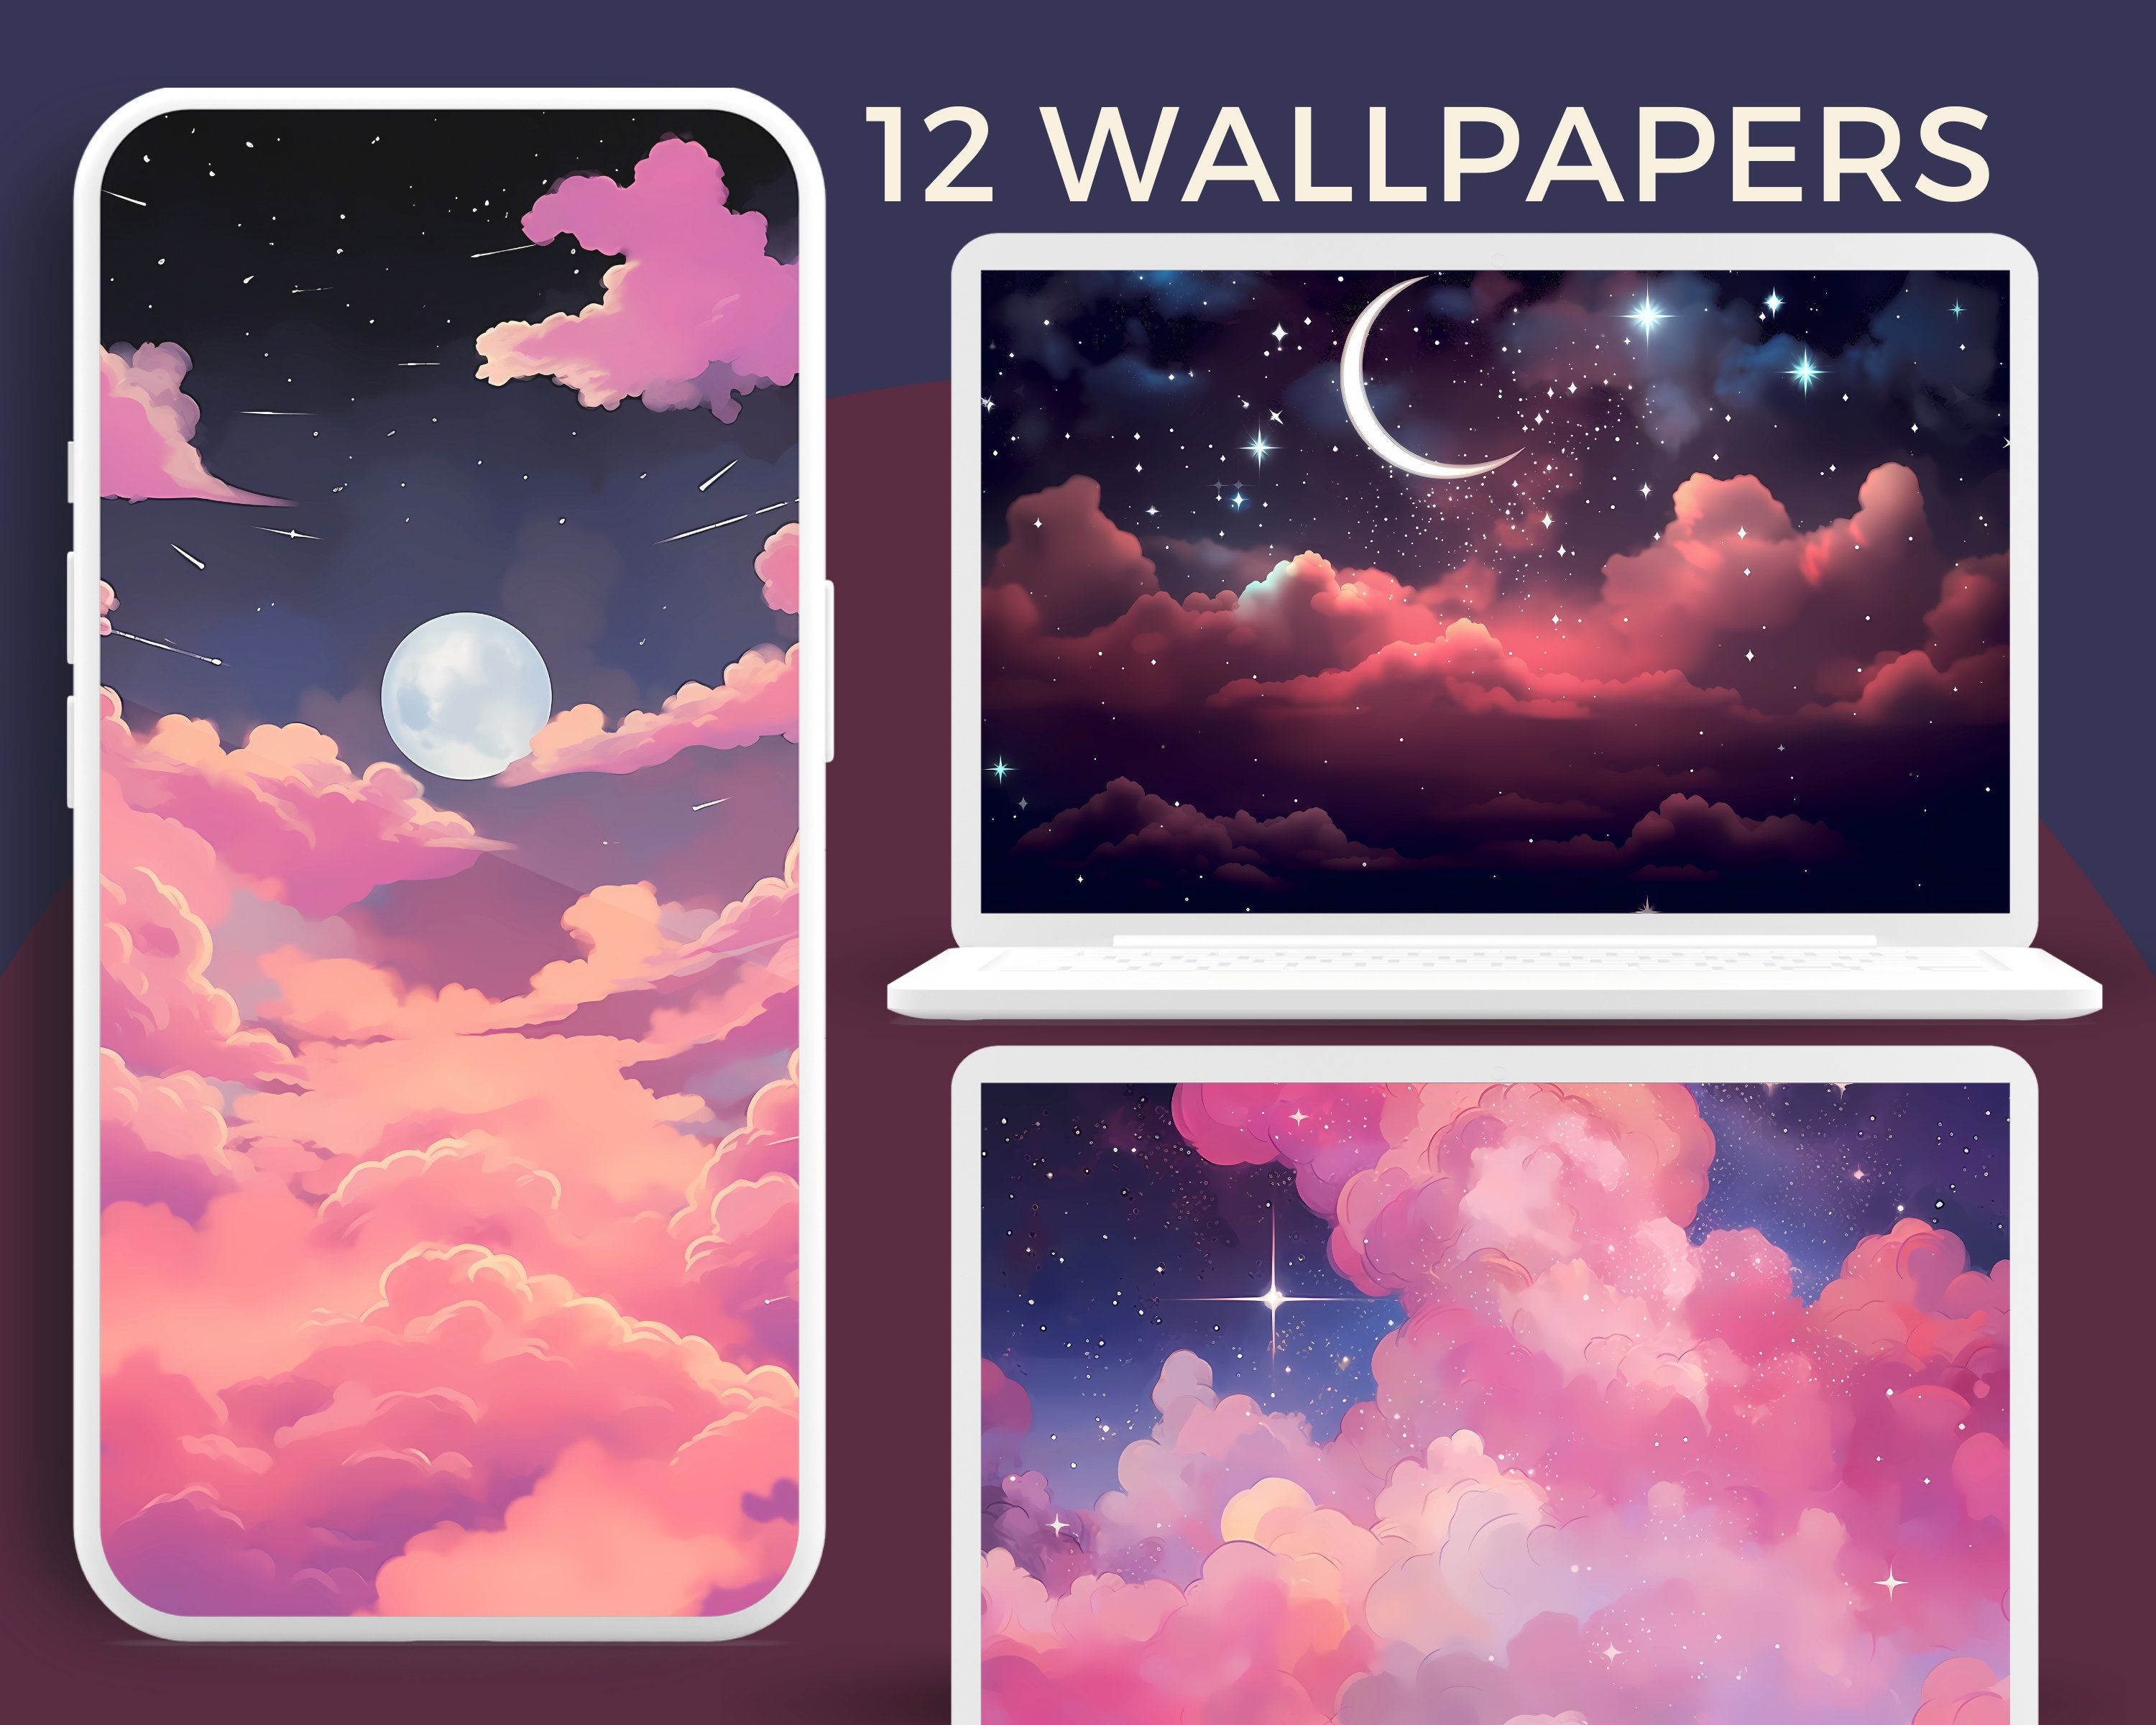 <ref> A phone</ref><box>(28,45),(975,991)</box>, laptop, and tablet each displaying a different wallpaper. - Stars